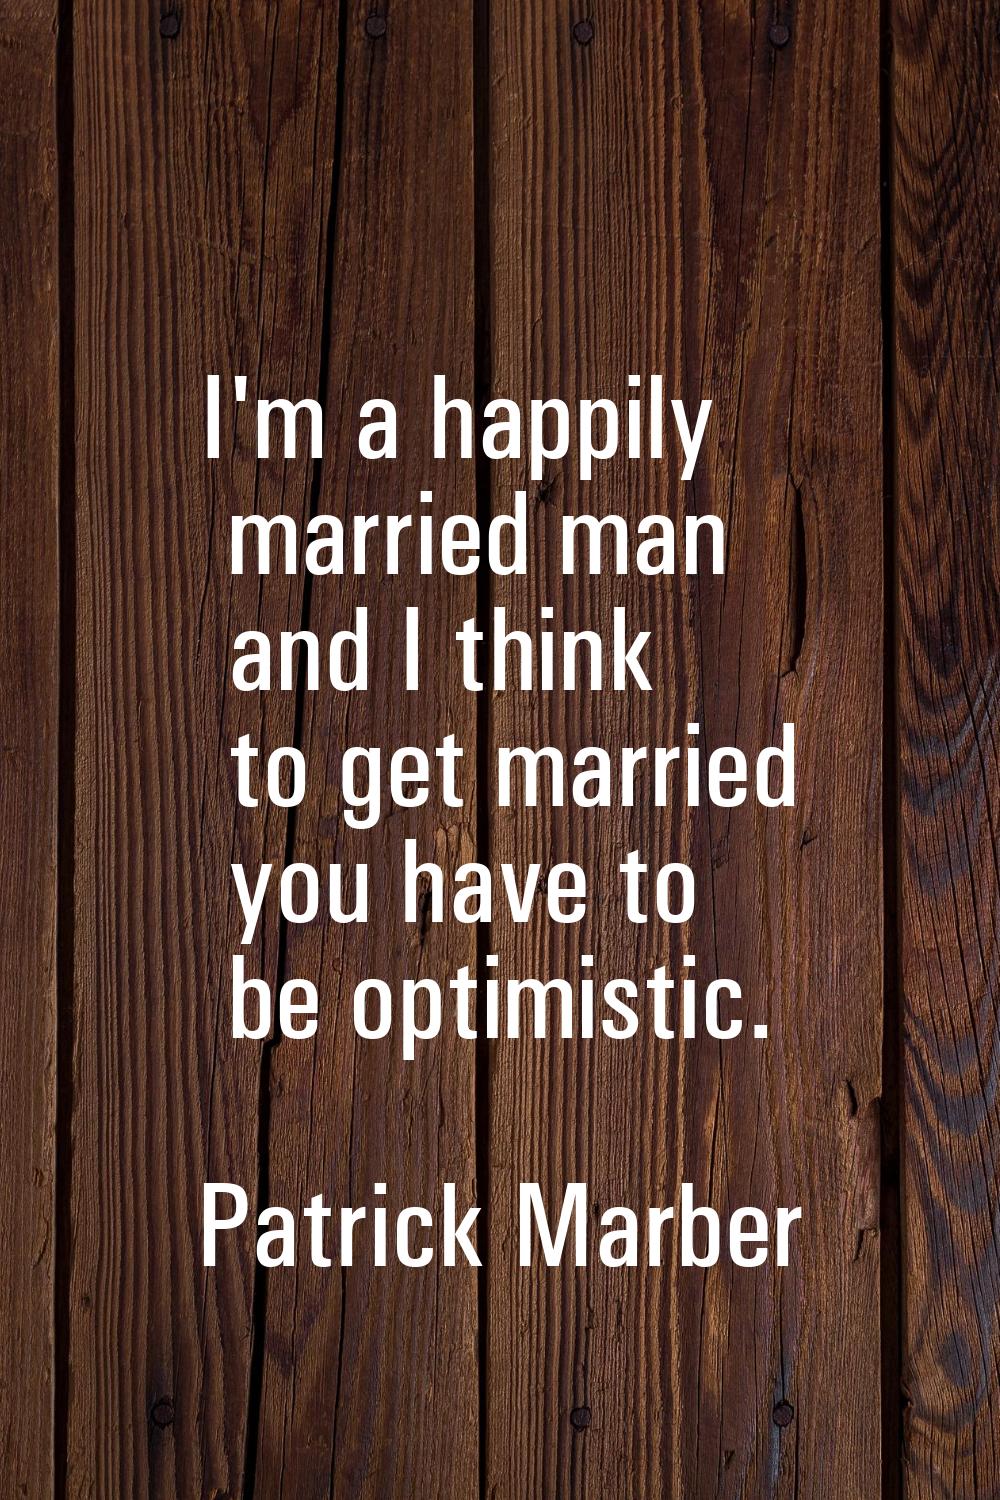 I'm a happily married man and I think to get married you have to be optimistic.